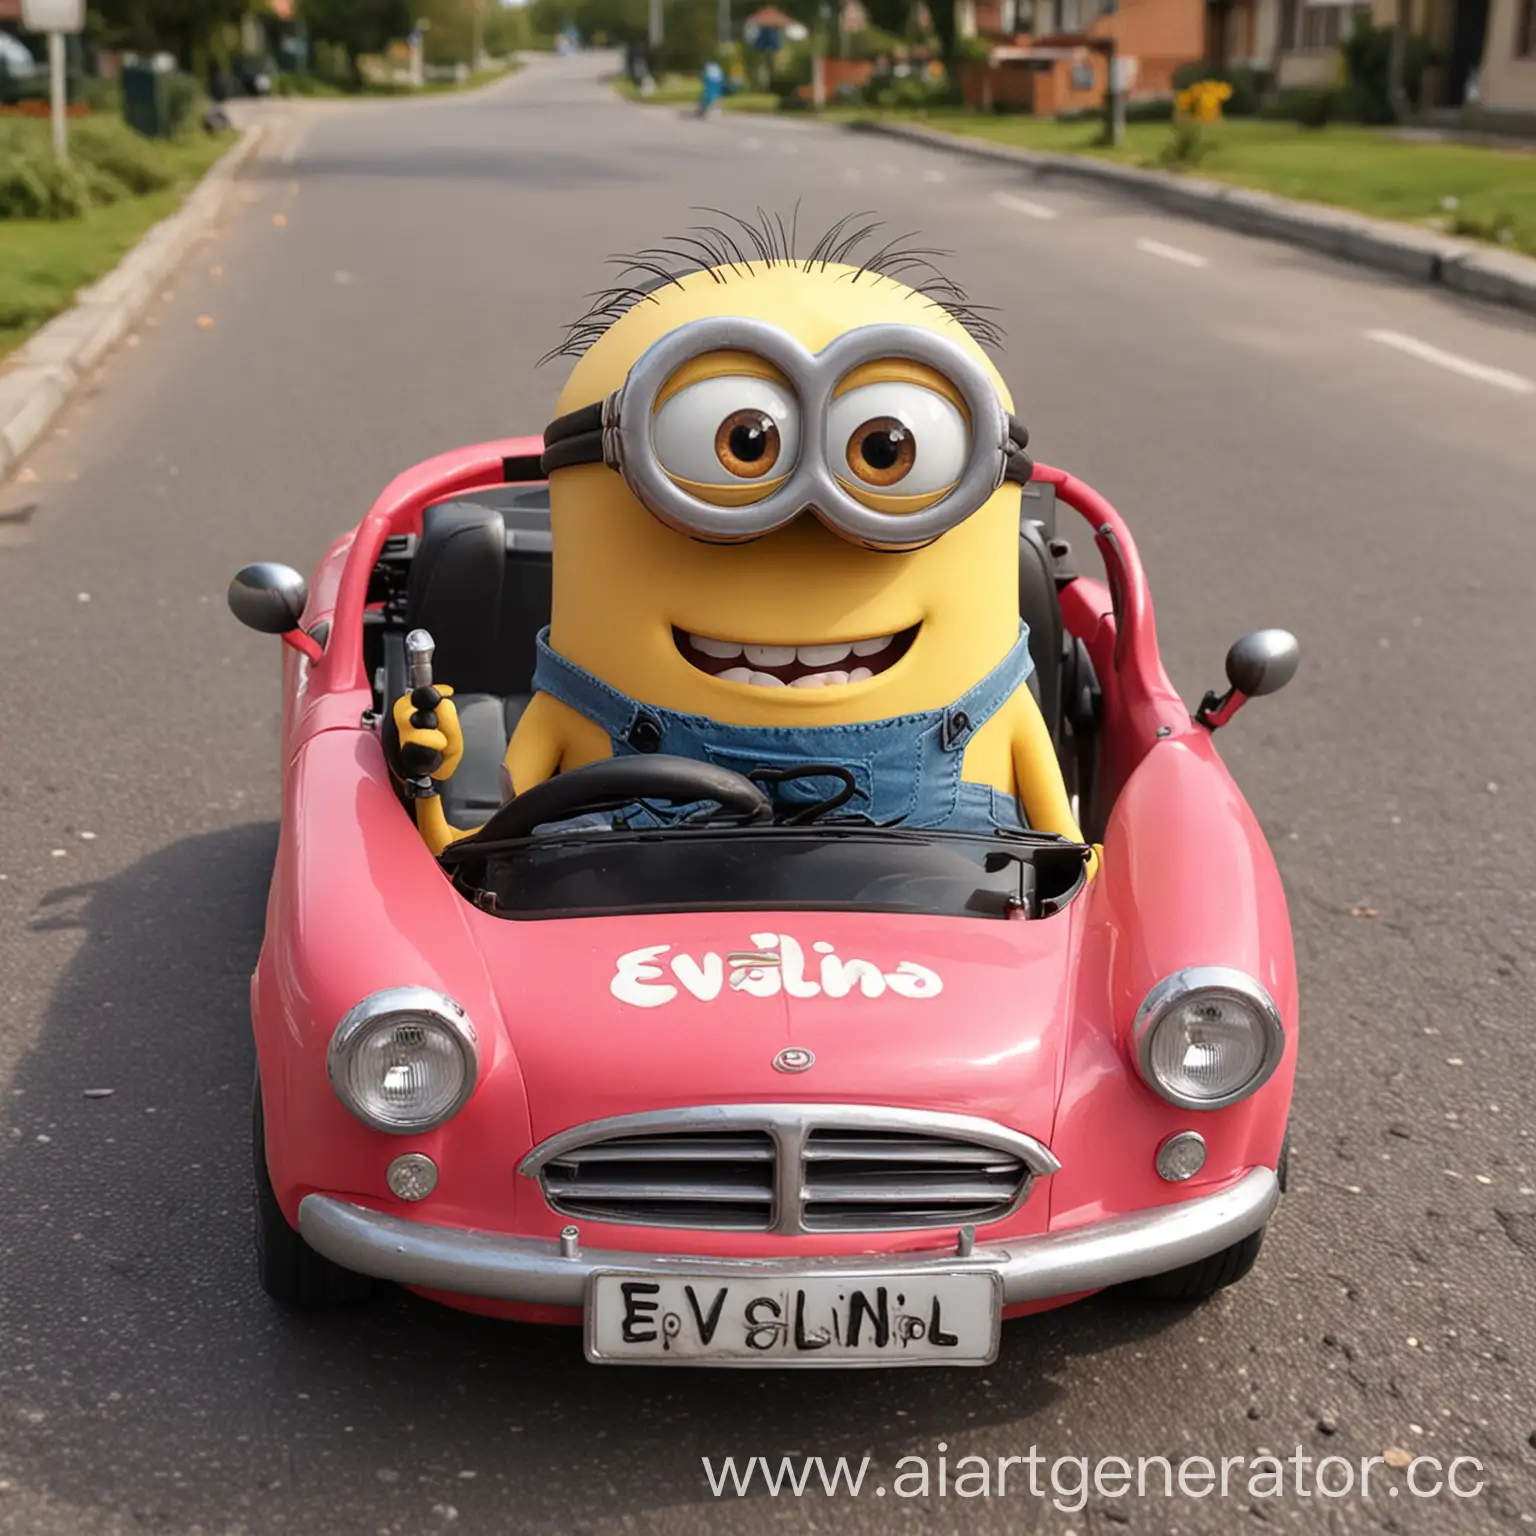 minion in a car with a car number in the form of the name Evelina